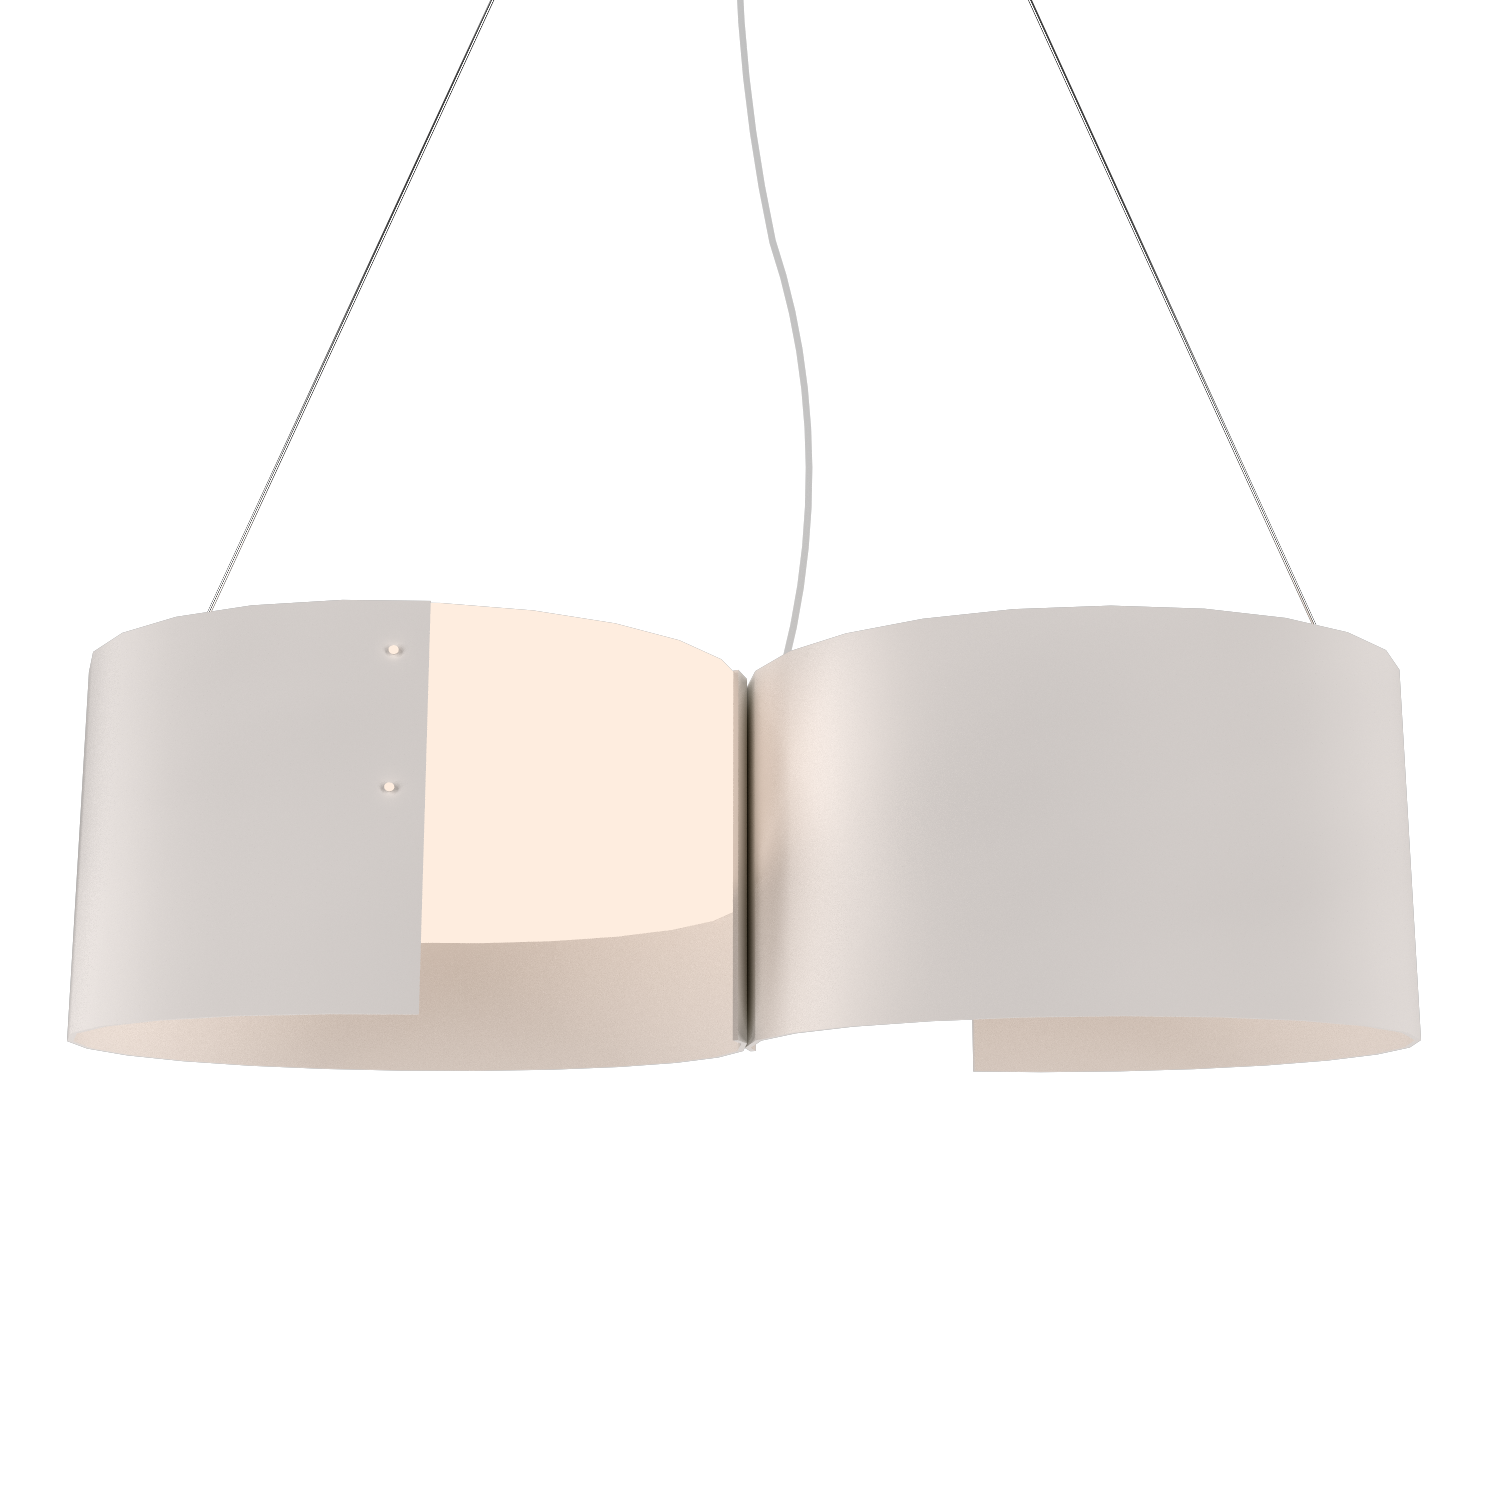 Pendant Lamp Accord Orgânico 283 - Orgânica Line Accord Lighting | 25. Iredescent White